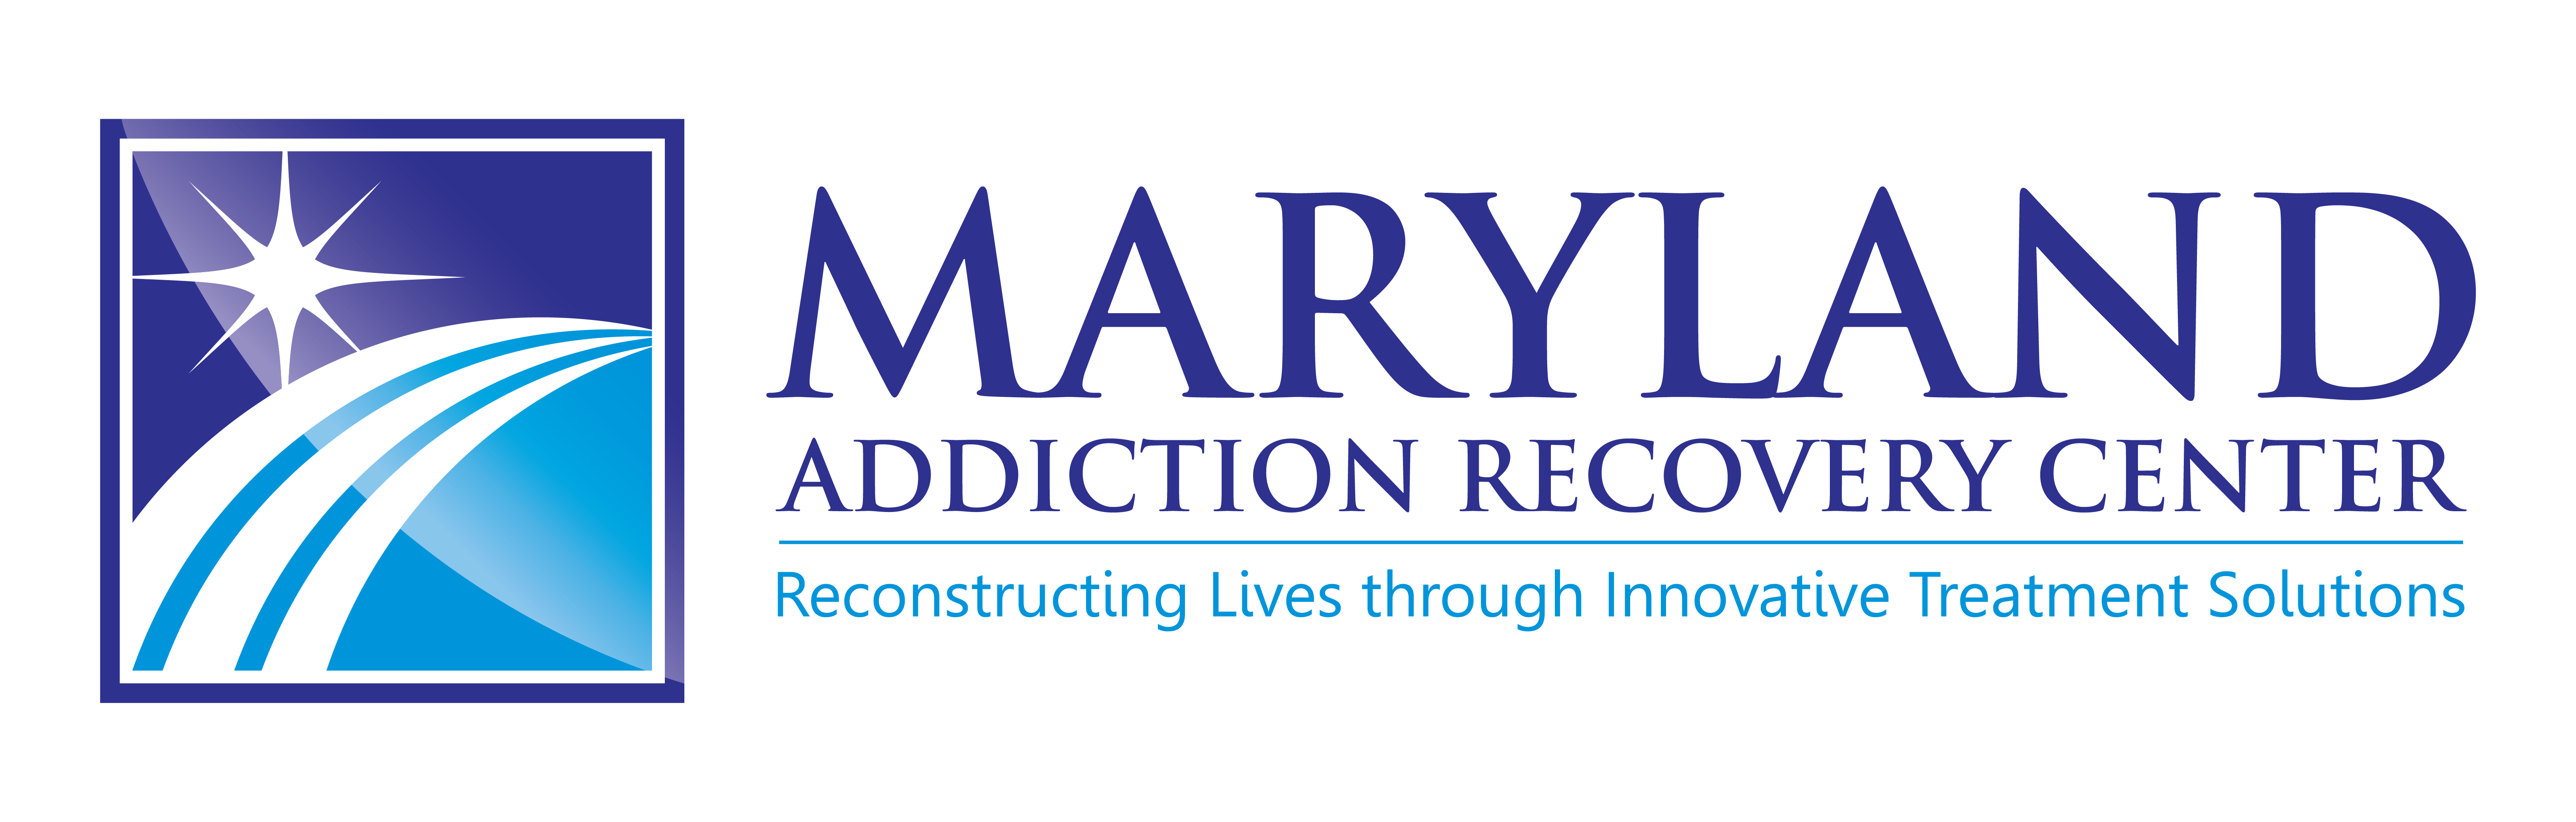 Maryland Addiction Recovery Center Accredited National Association Of Addiction Treatment Providers